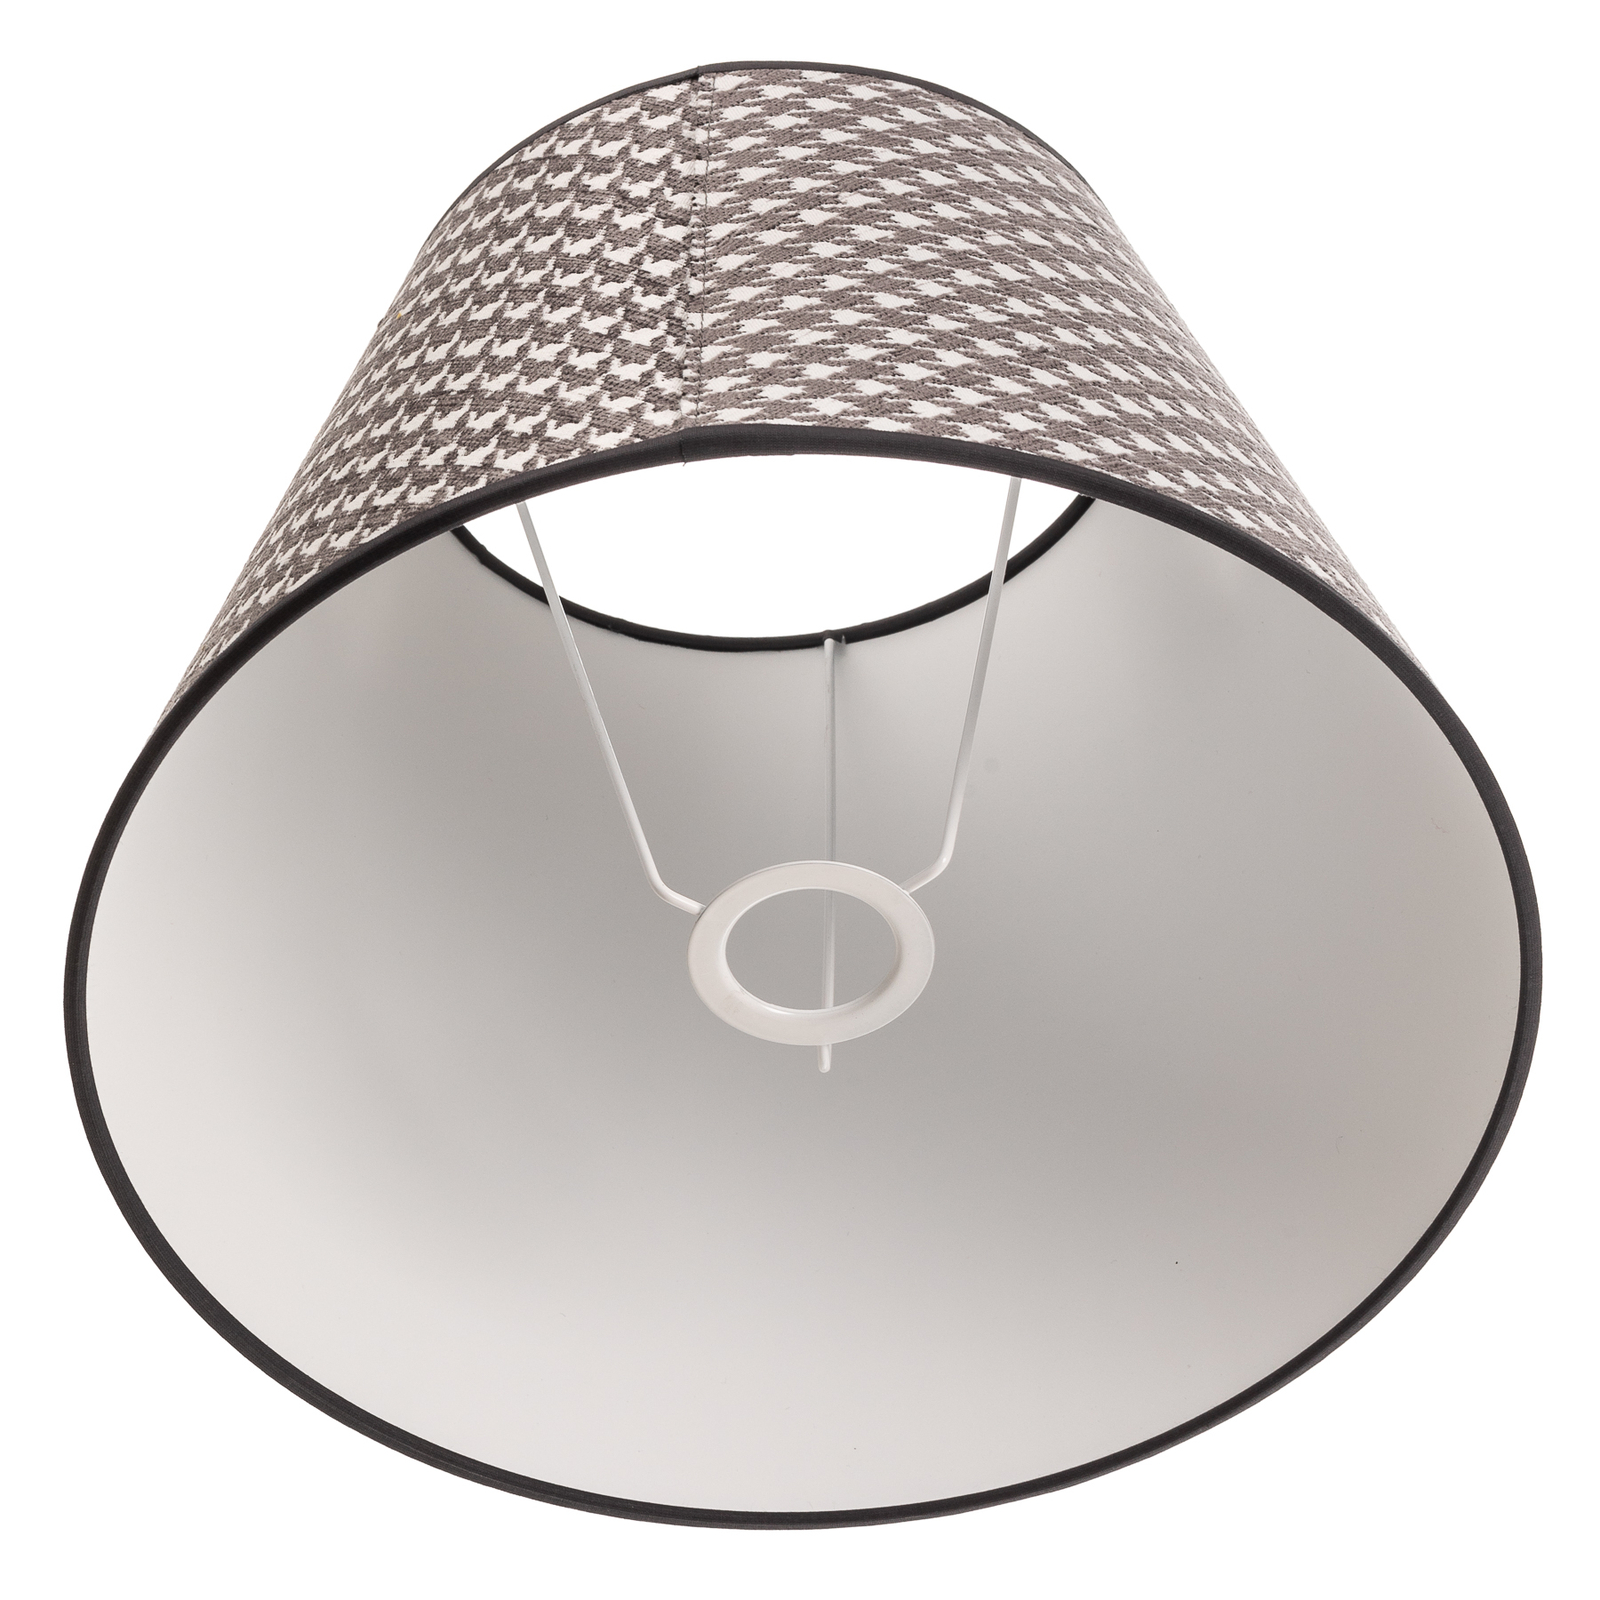 Sofia lampshade 26 cm, houndstooth pattern grey